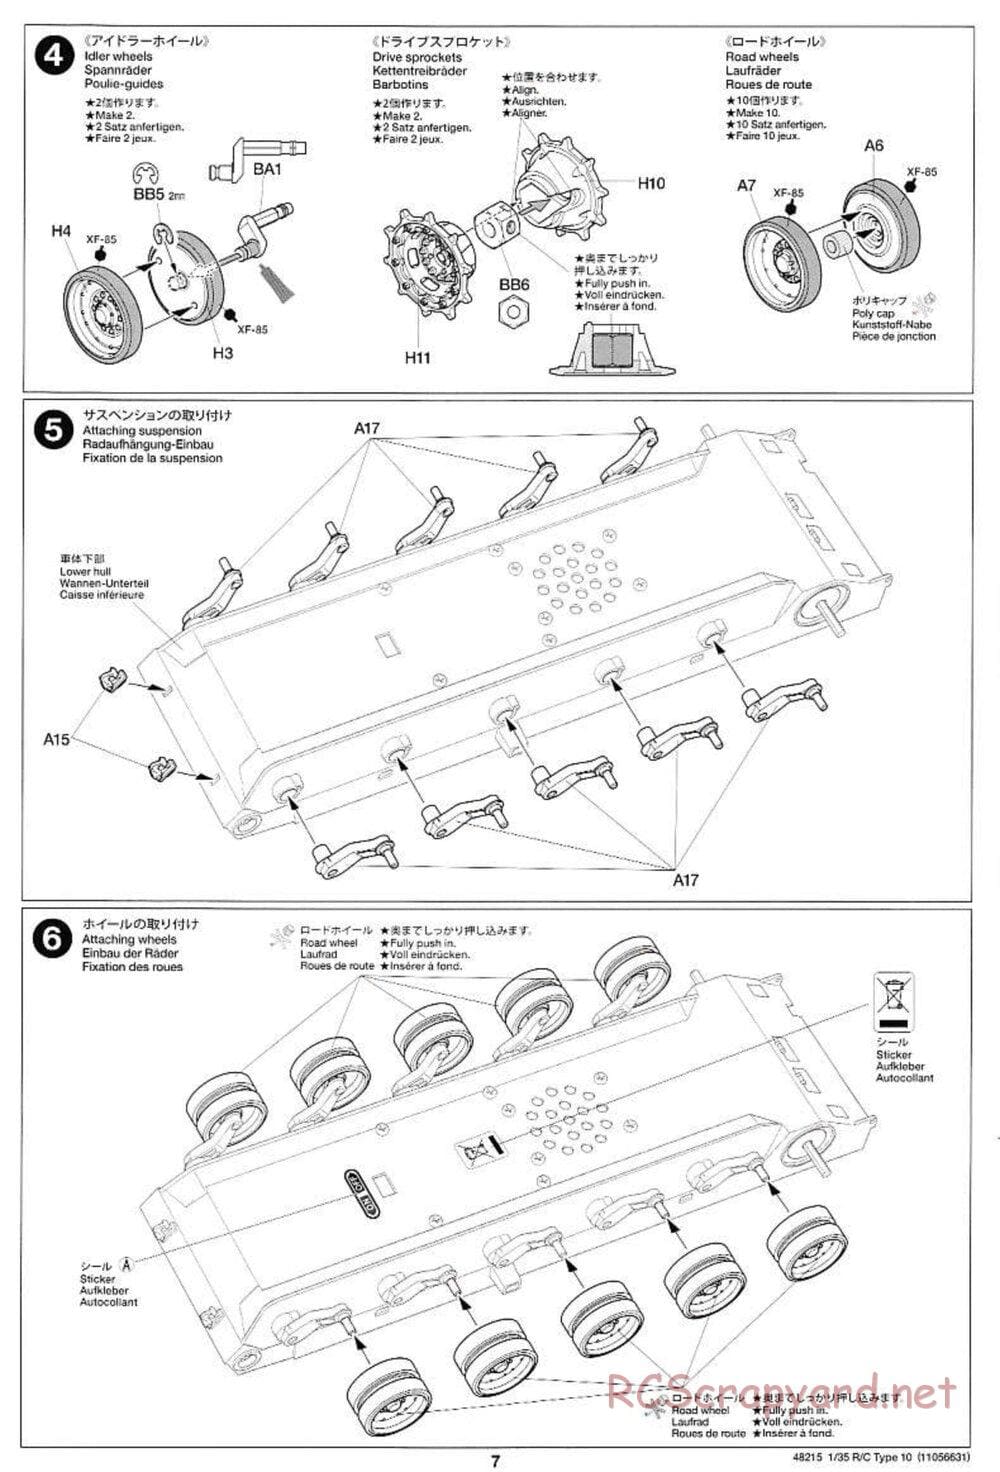 Tamiya - JGSDF Type 10 Tank - 1/35 Scale Chassis - Manual - Page 7